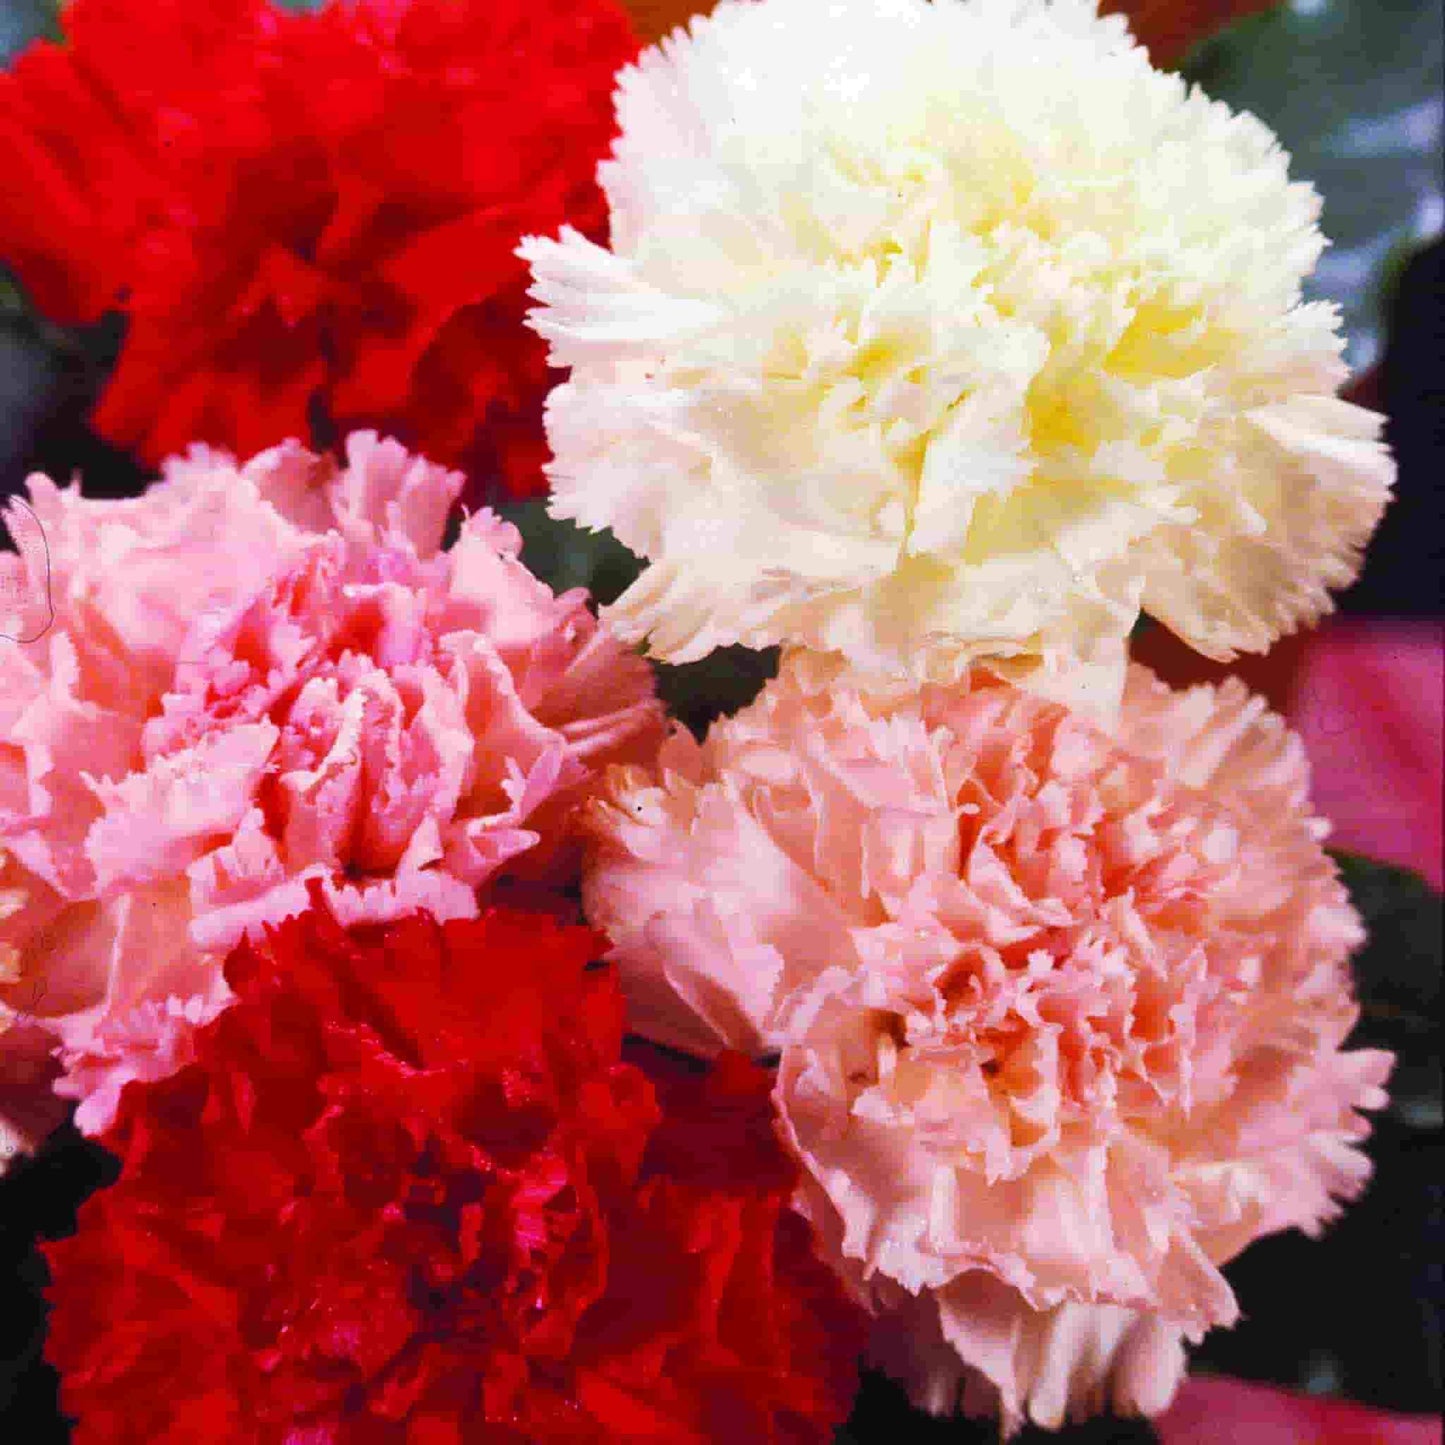 Chabaud Giant Mixed Colors Carnation seeds blooming beautifully in colors of white, red and pink. Picture shows mature flower plant.